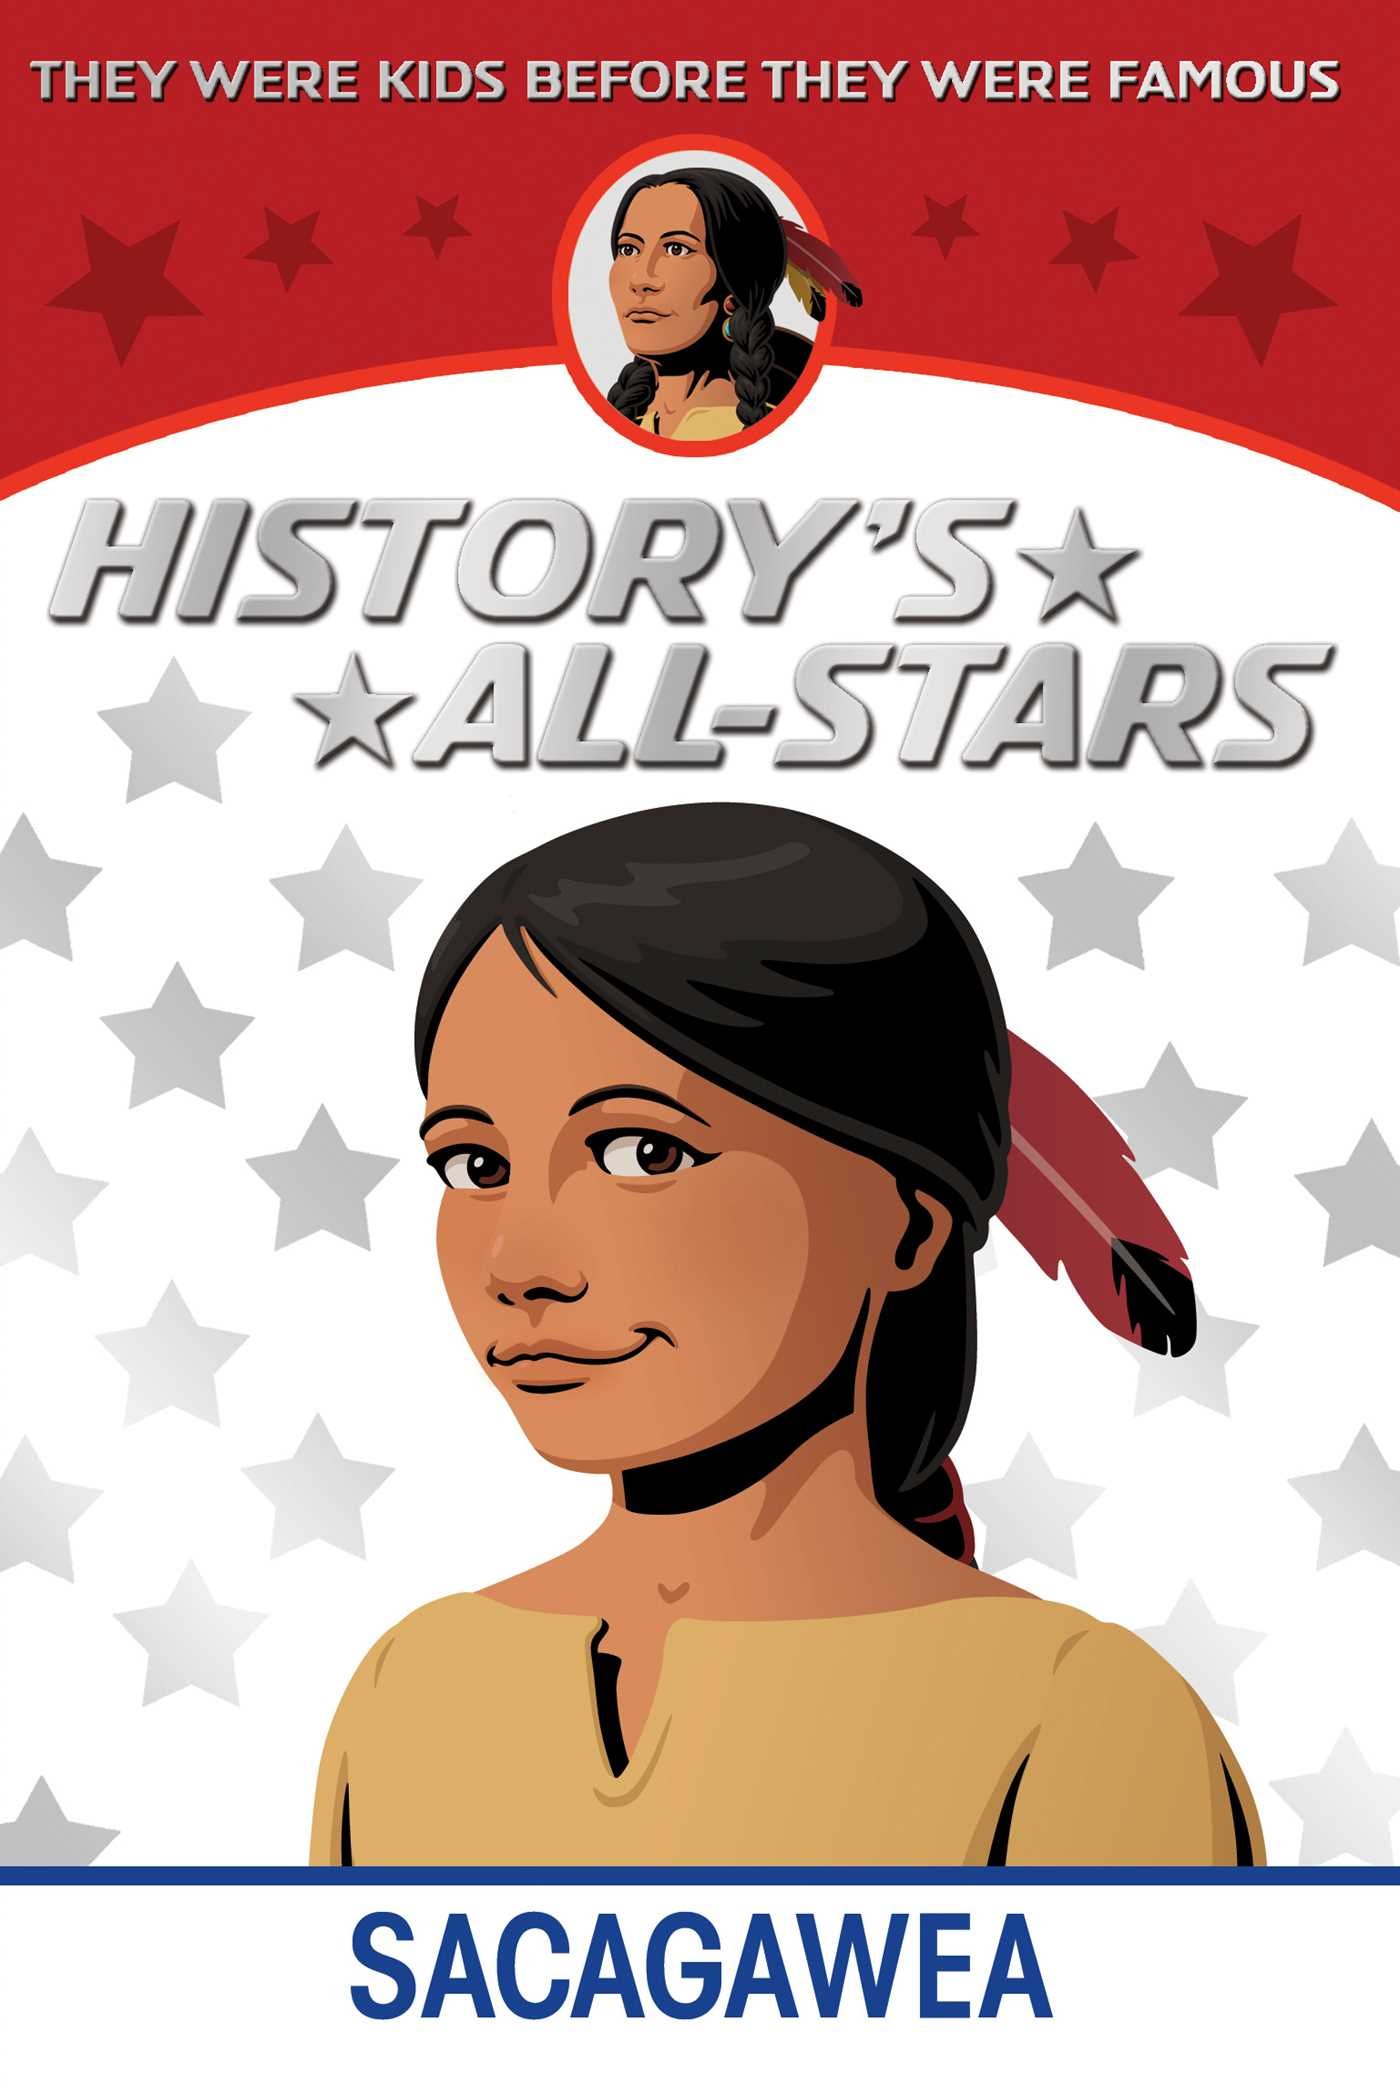 Sacagawea Historical Kids: What the HECK is Going On With Nonfiction Bios These Days?